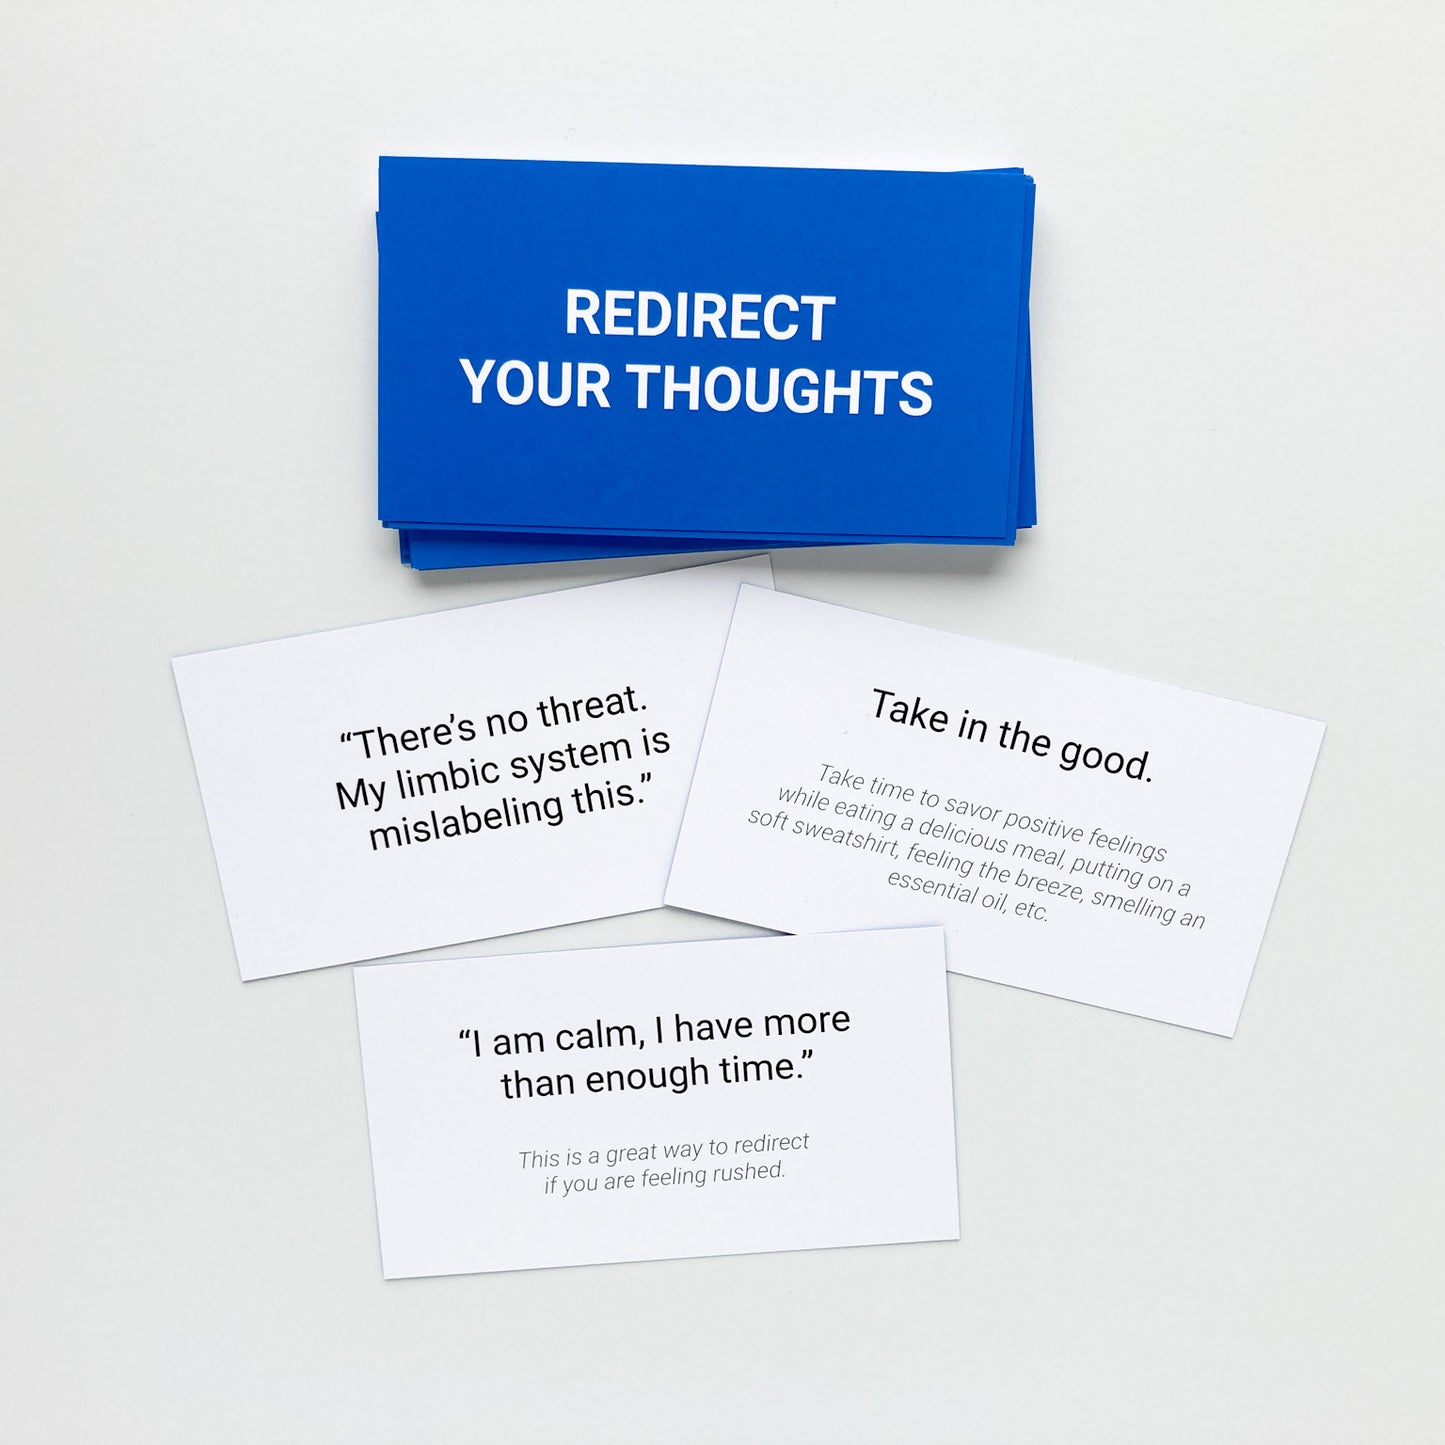 How I'm Healing Brain Retraining Practice Cards. Redirect Your Thoughts cards pictured